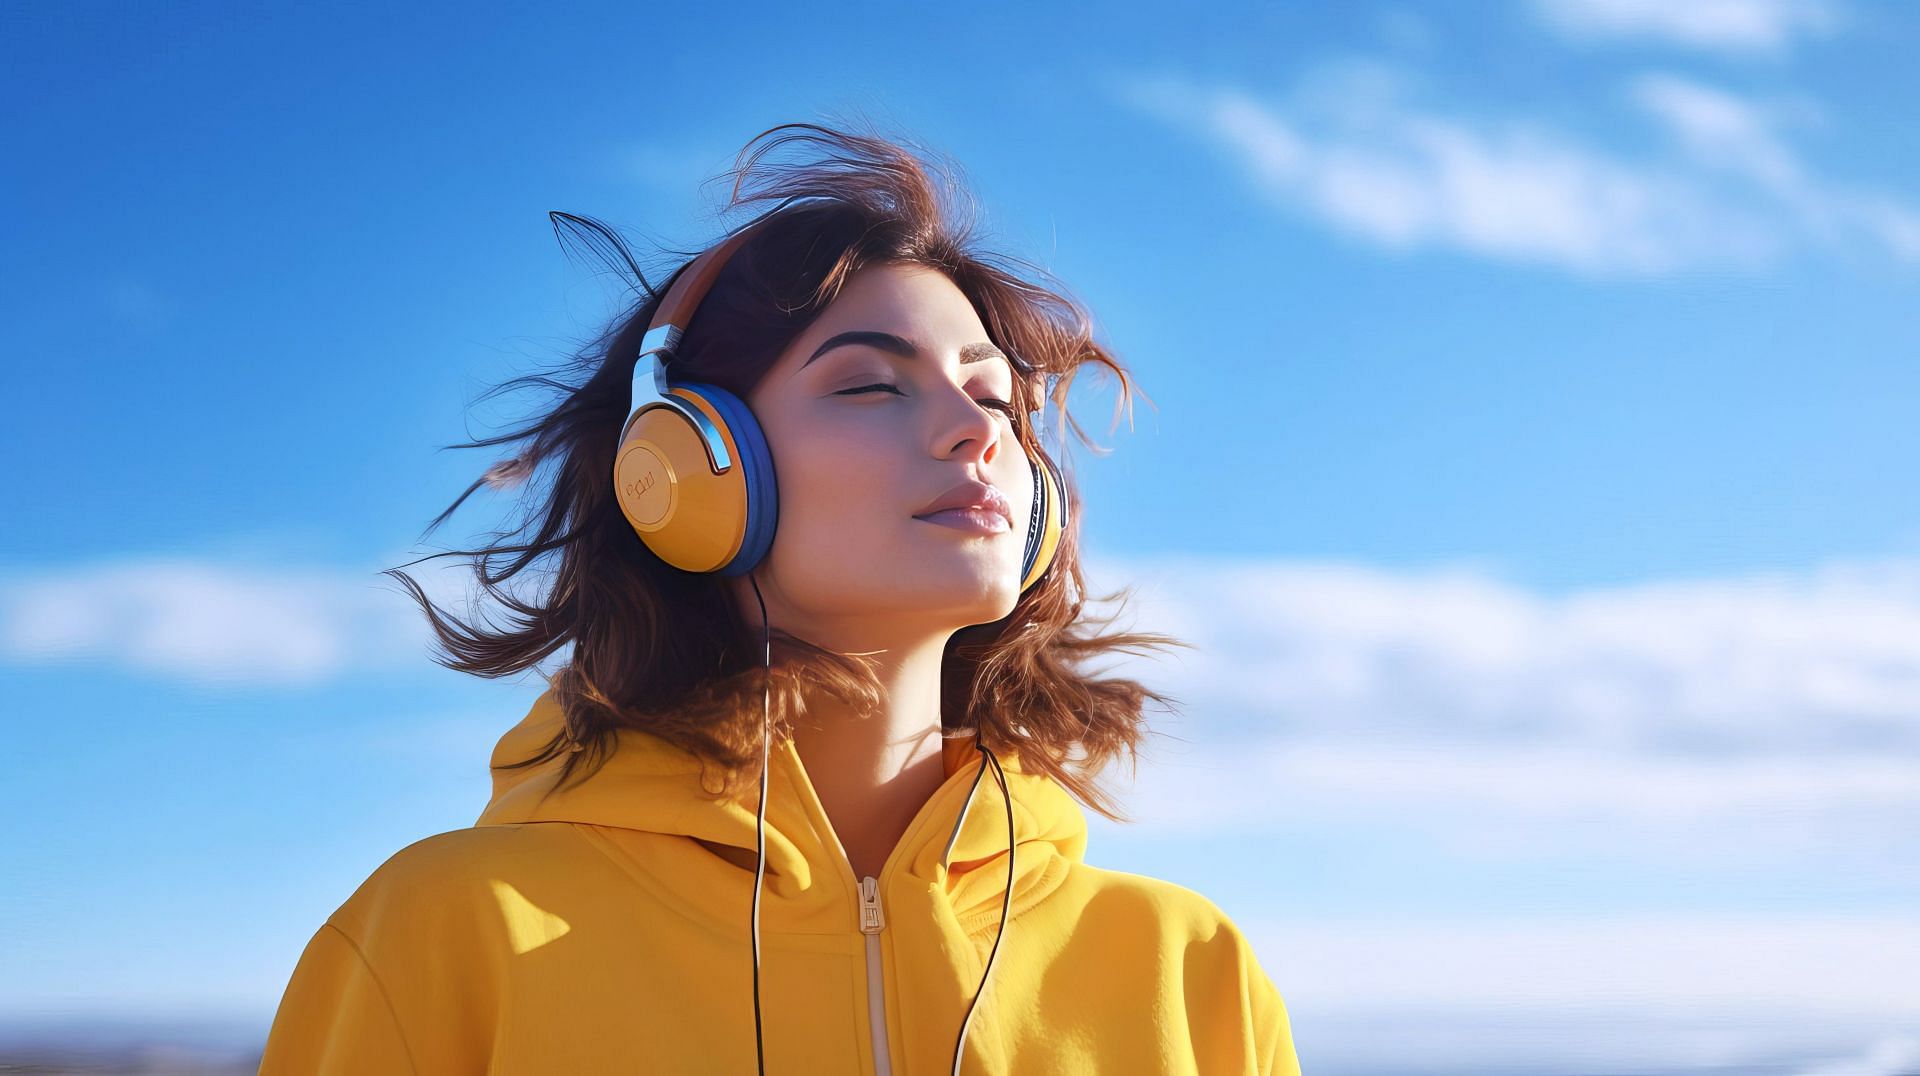 Ever tried music for anxiety? Here is how it can help you. (Image via Vecteezy/ Olga Gubskaya)